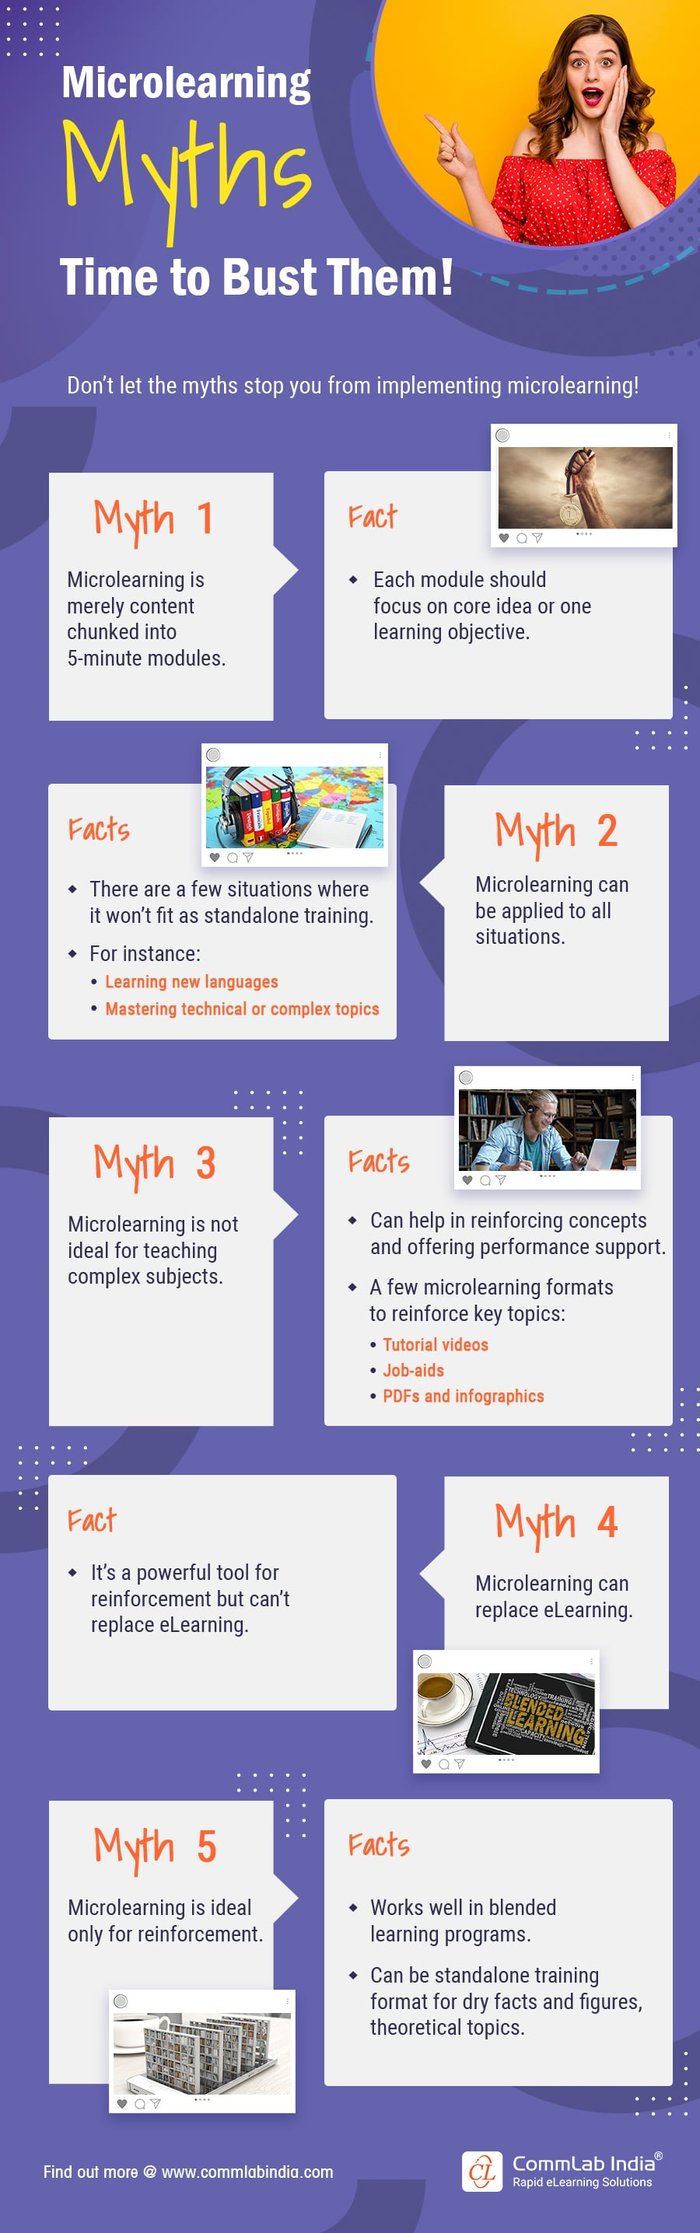 Microlearning Myths Busted for Training Managers